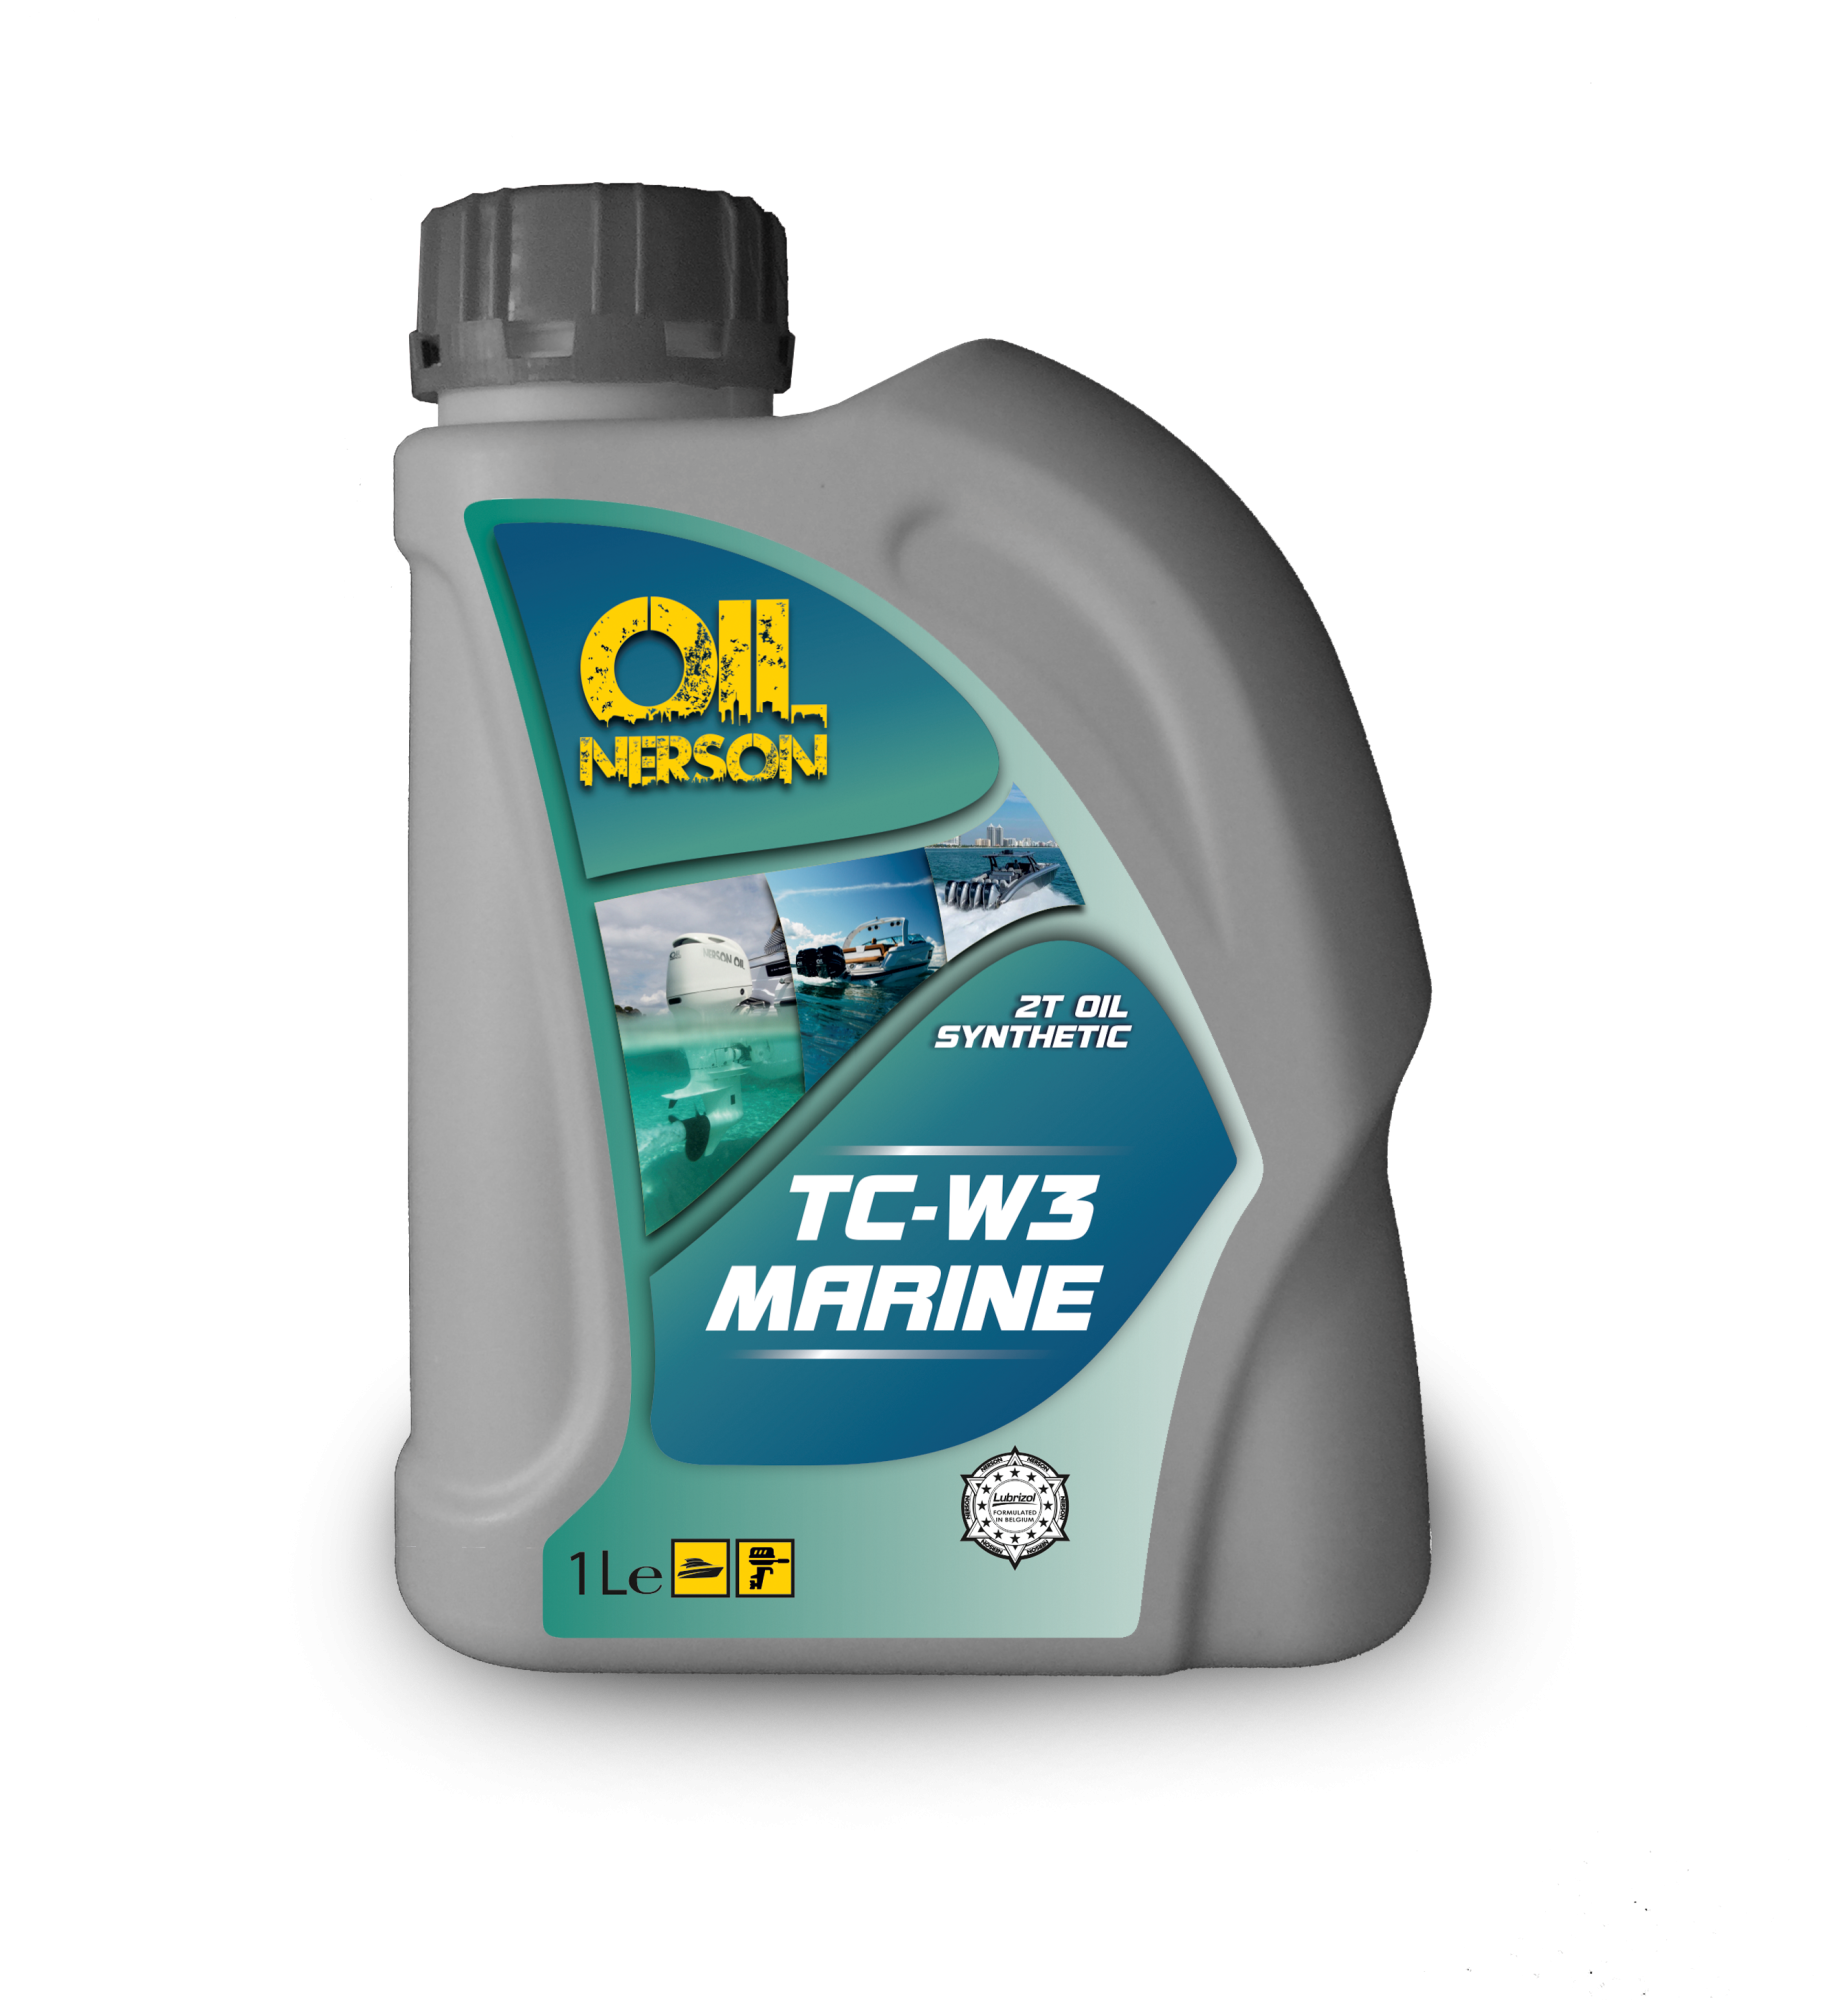 Масло 2t TC-w3. Масло моторное Nerson. Масло Nerson Oil. SM Marine 2t масло. Лодочное масло tc w3